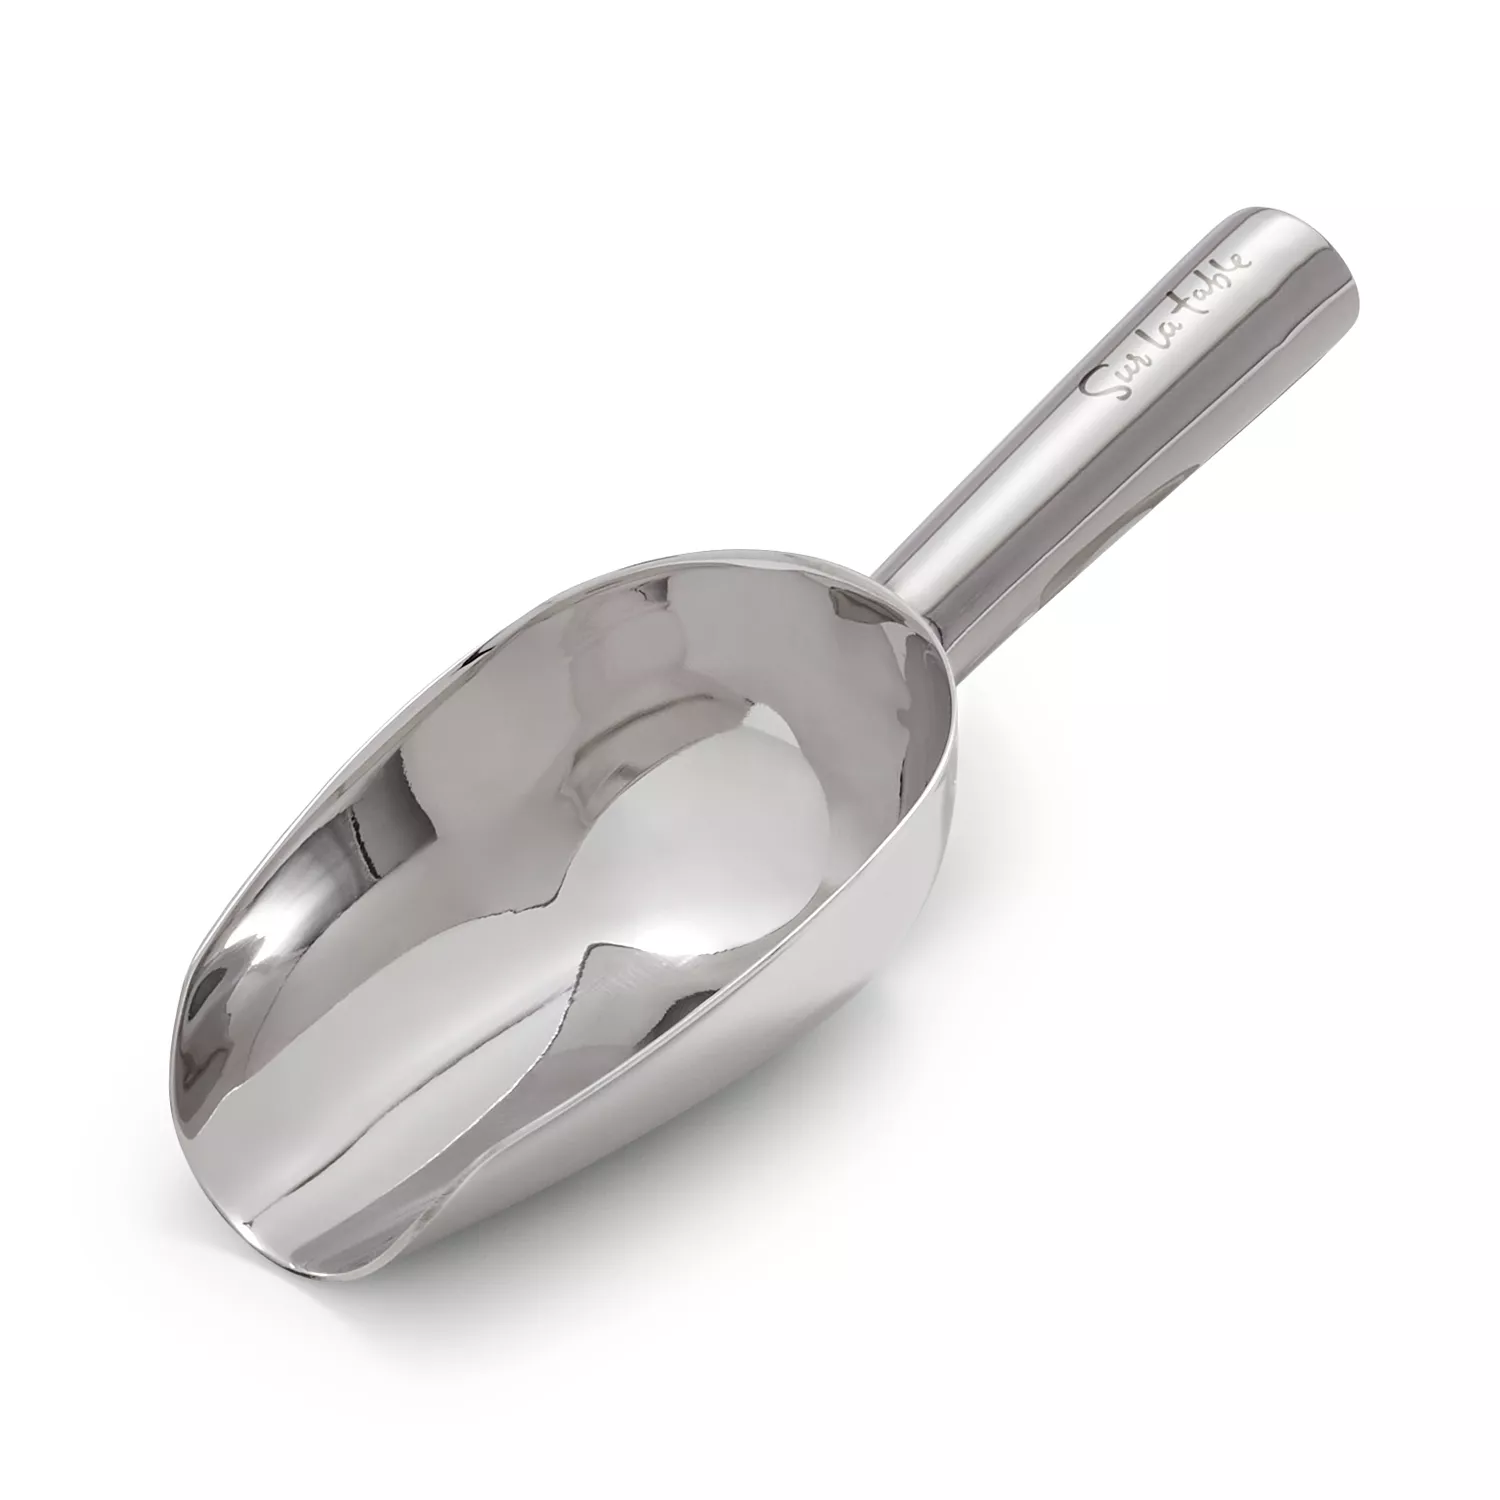 Dash of That Stainless Steel Cookie Scoop - Silver, 1 ct - Baker's